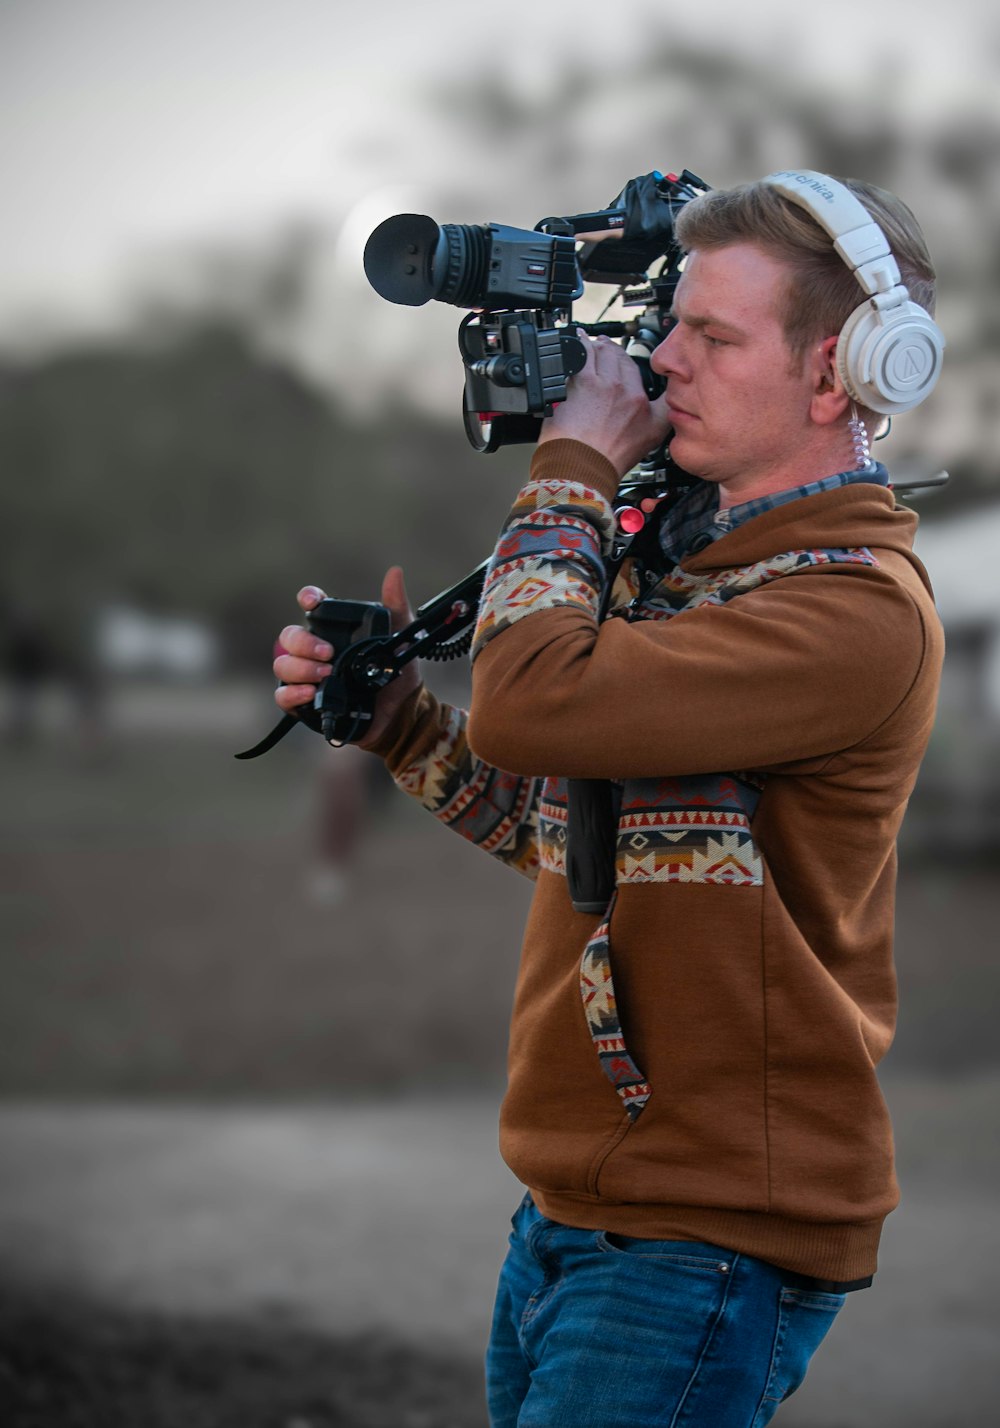 a man wearing headphones and holding a camera